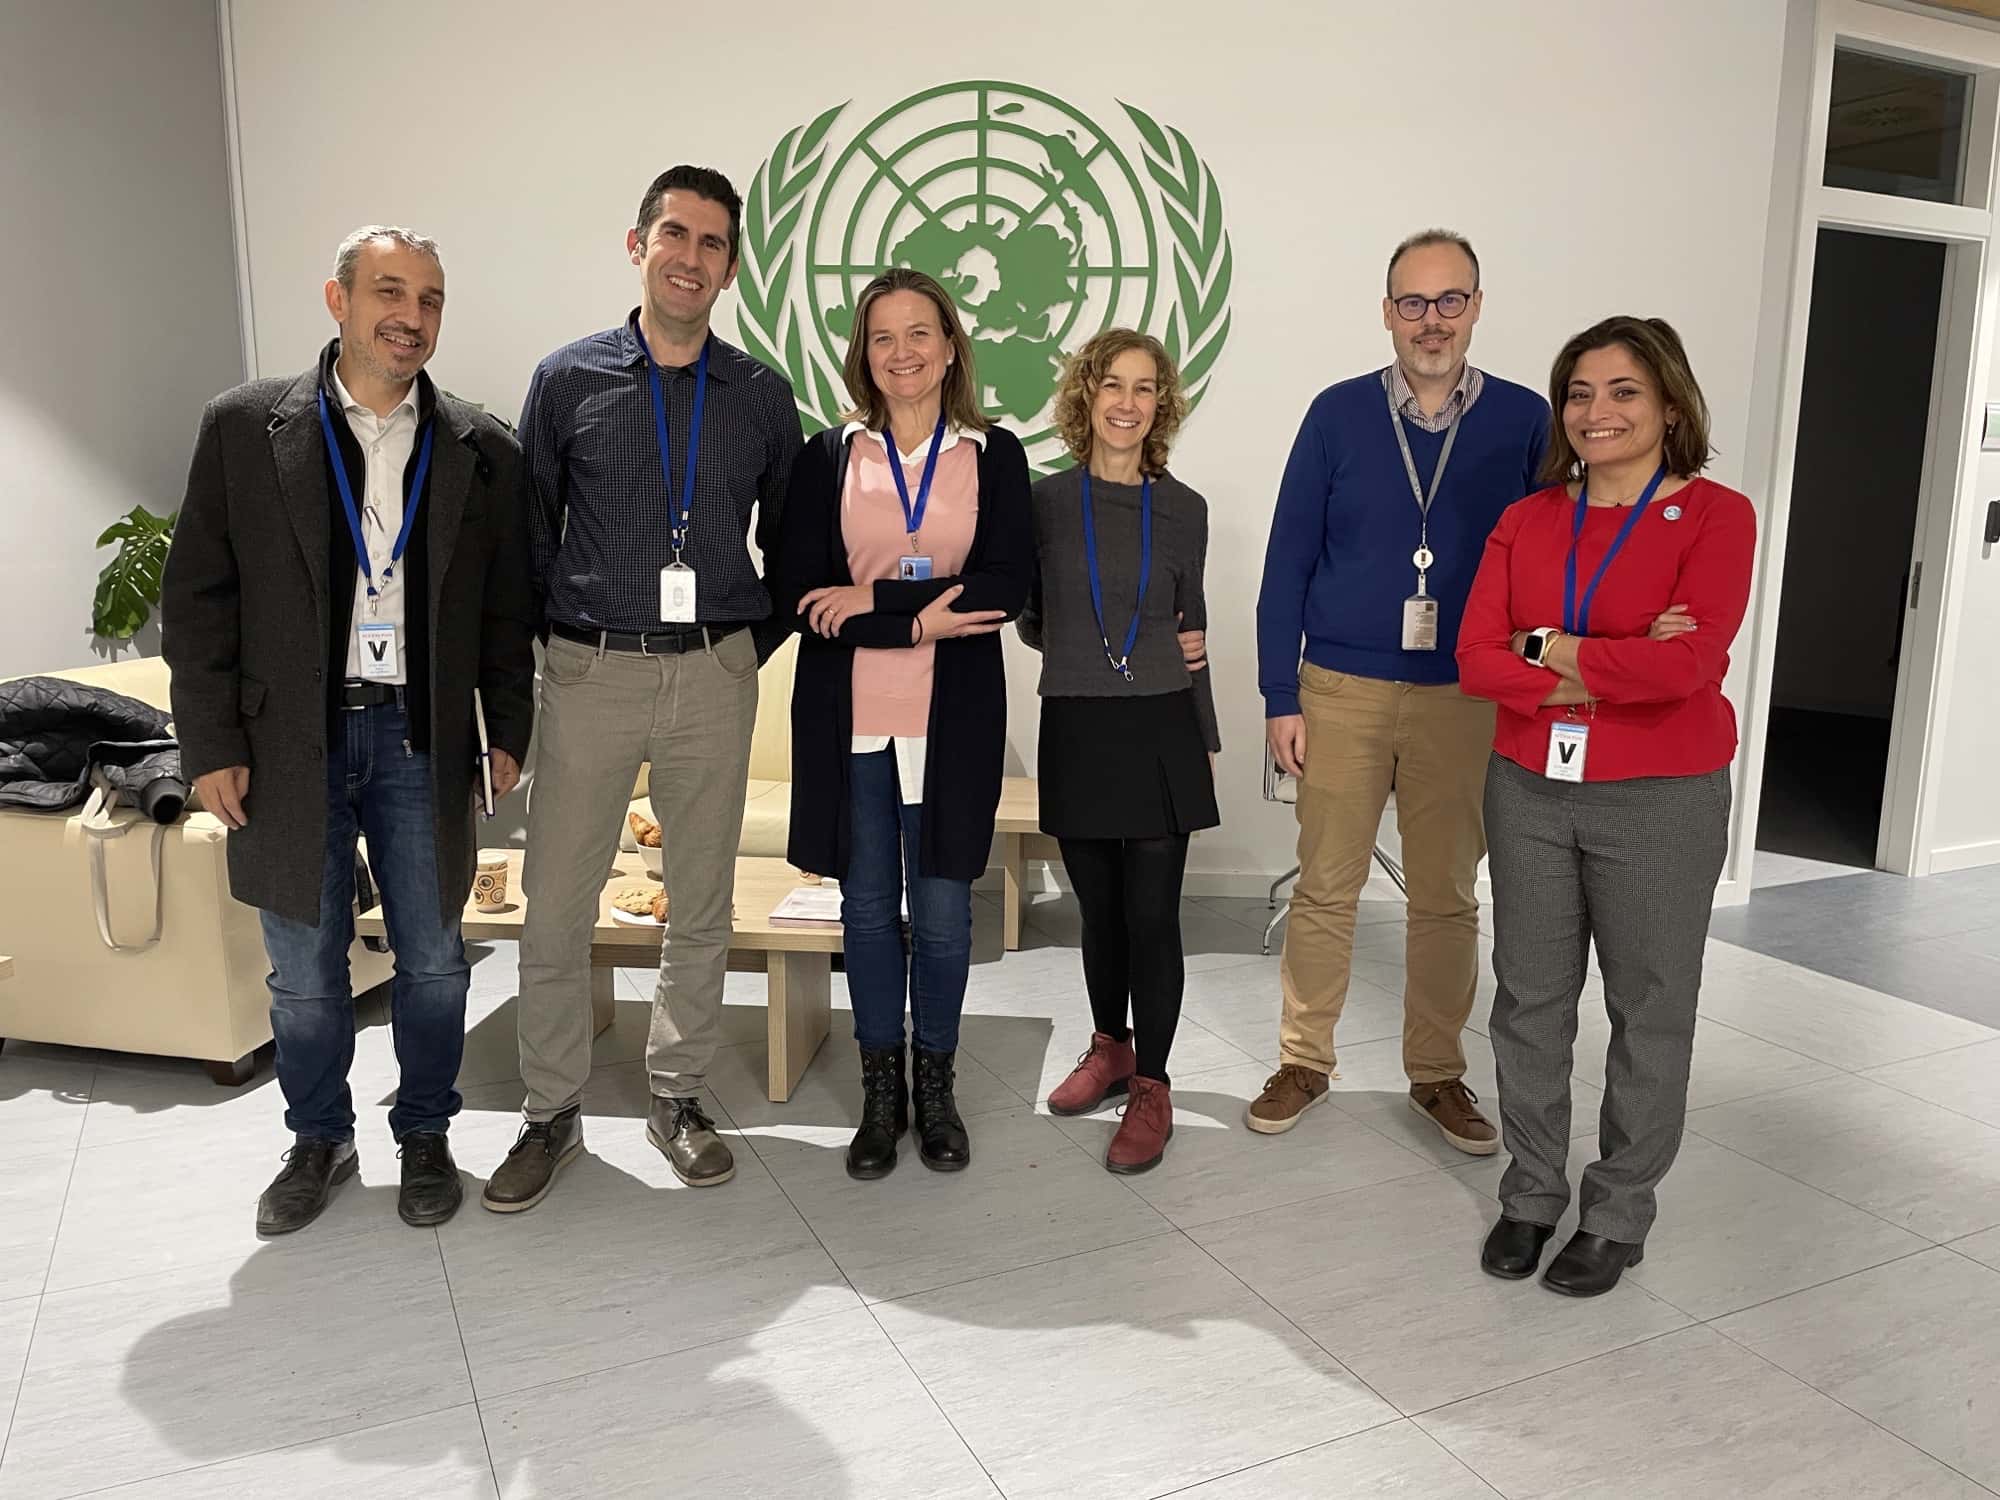 Data and Analytics team with other UNICC team members met with colleagues at the University of Valencia (UV) to brainstorm innovation and collaboration opportunities.